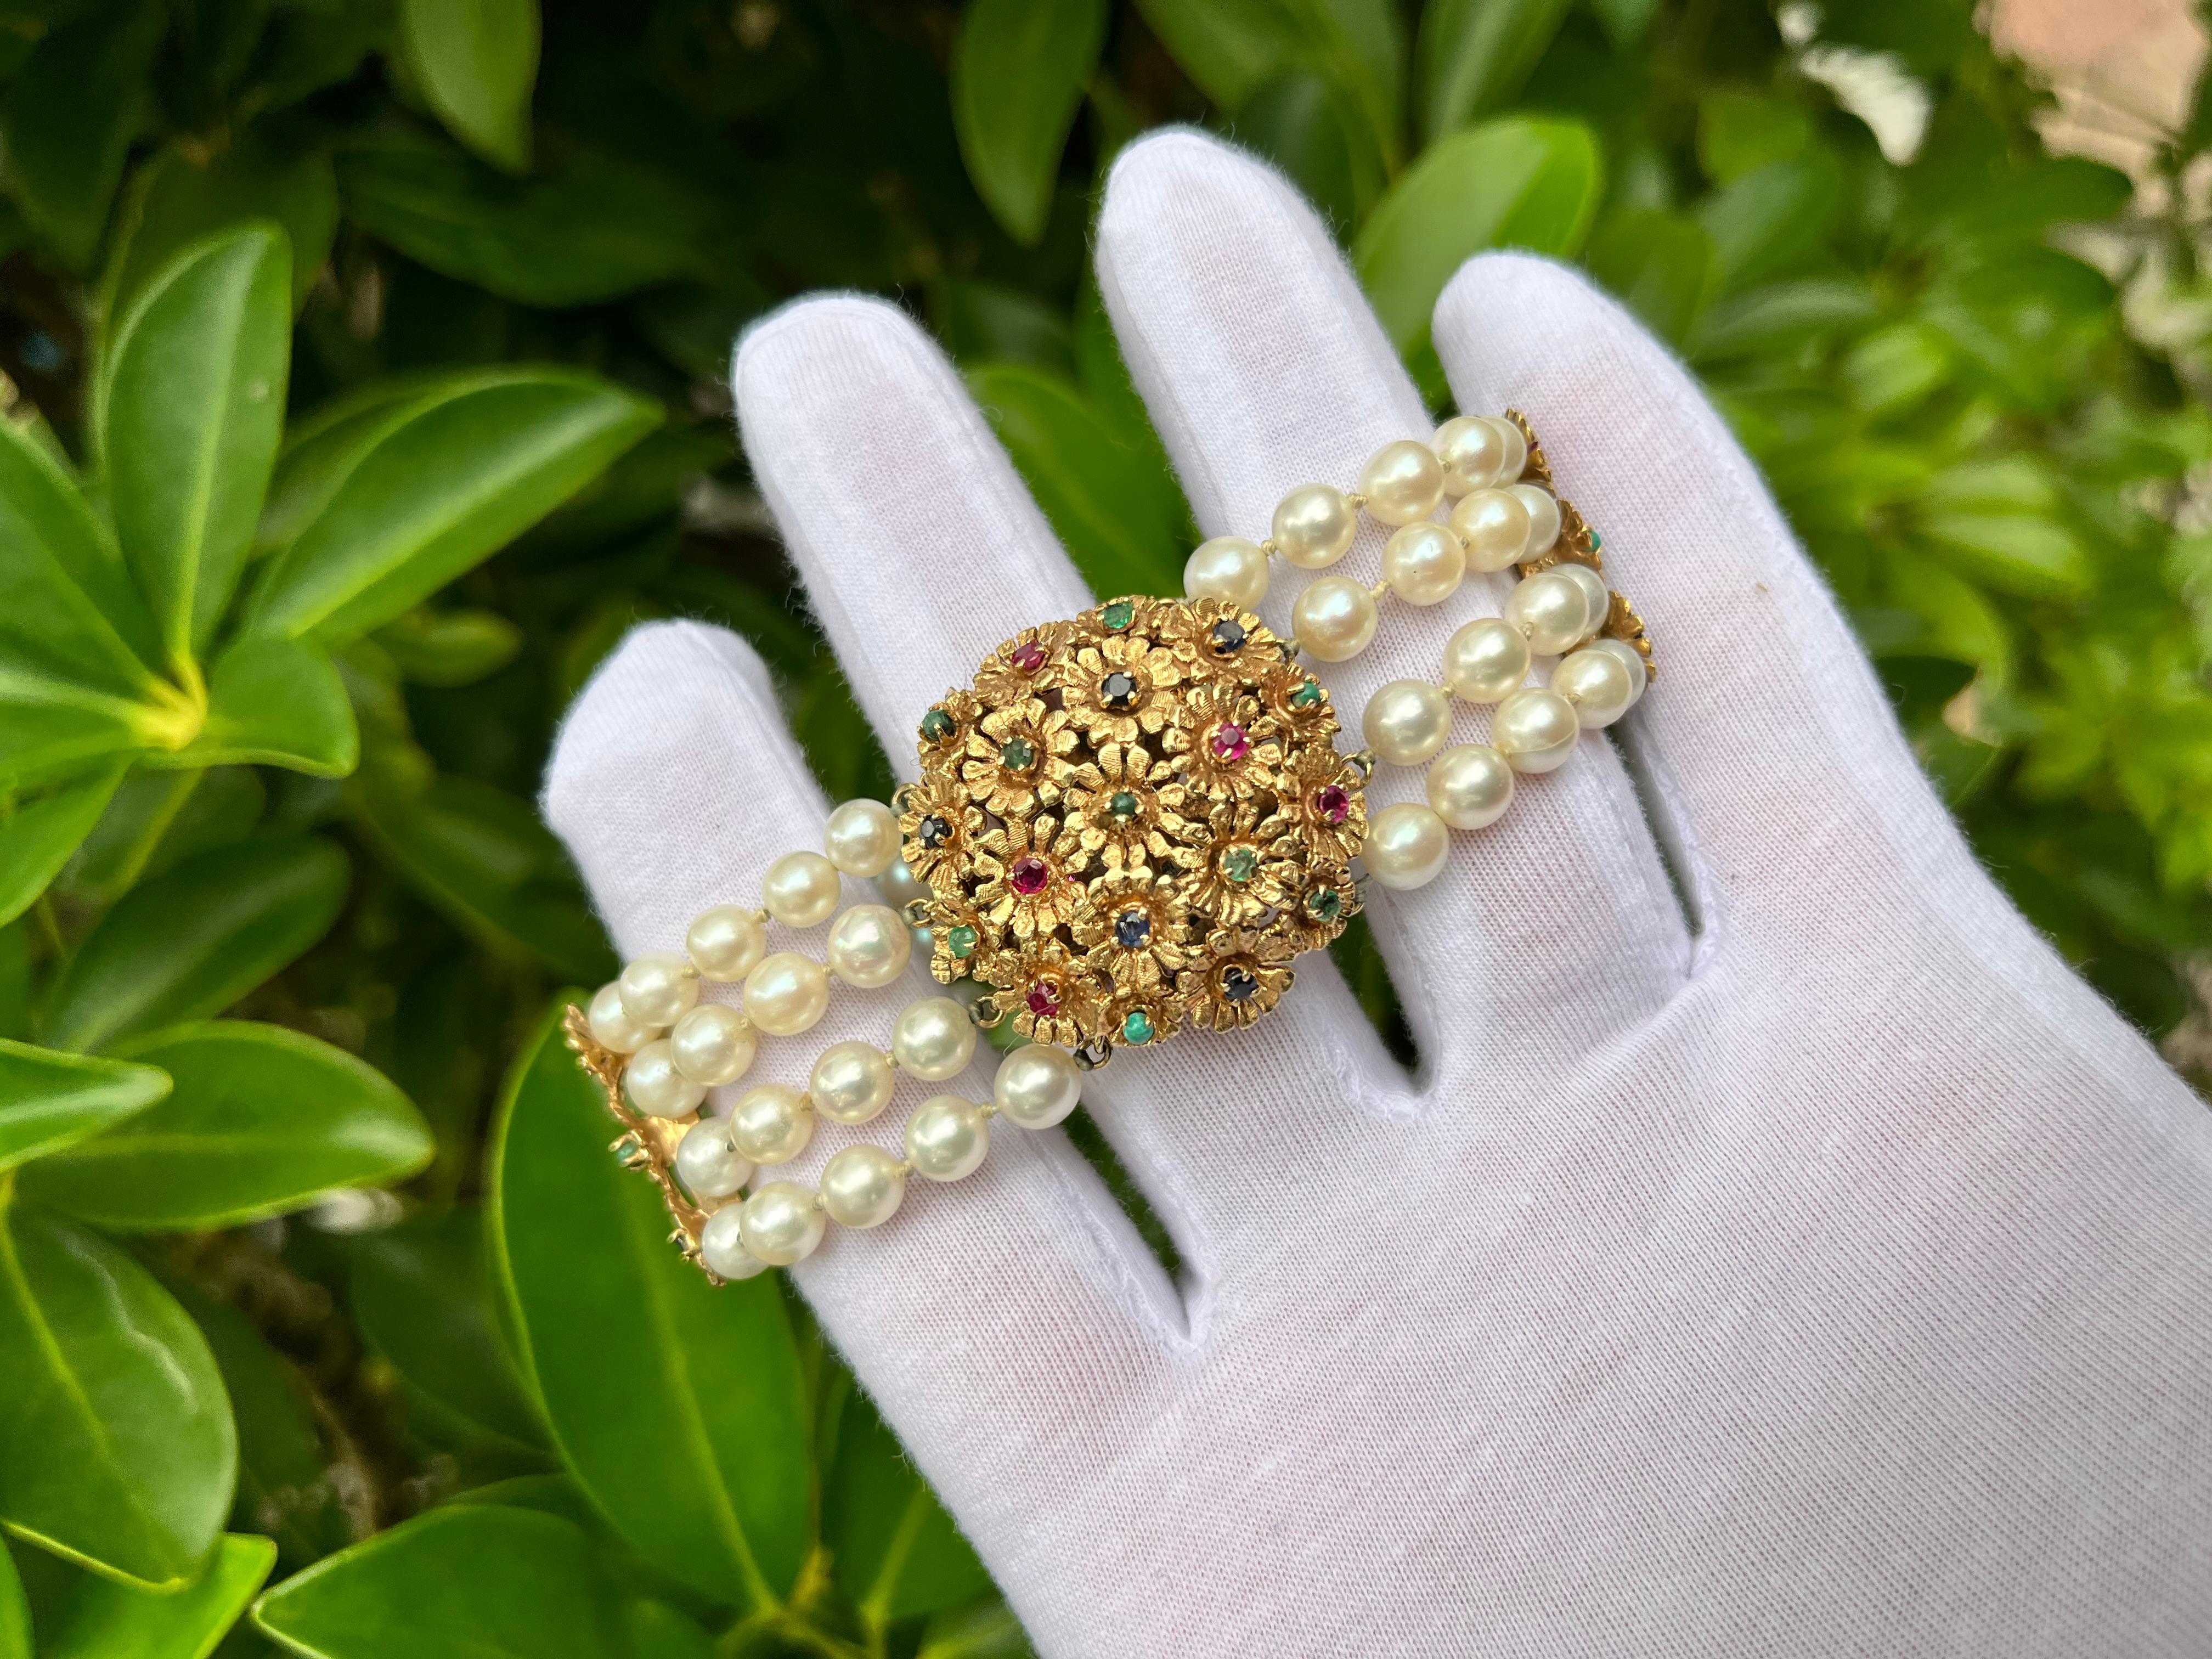 14K yellow gold pearl and multi-gemstone (Emerald, Ruby and Sapphire) Bracelet. Floral design and retro style. Mounted in a 4-prong setting with 28 round-cut gemstones. 

✔ Metal: Gold 
✔ Metal Purity: 18K 
✔ Length: 7 inches 
✔ Width: 0.80 inches